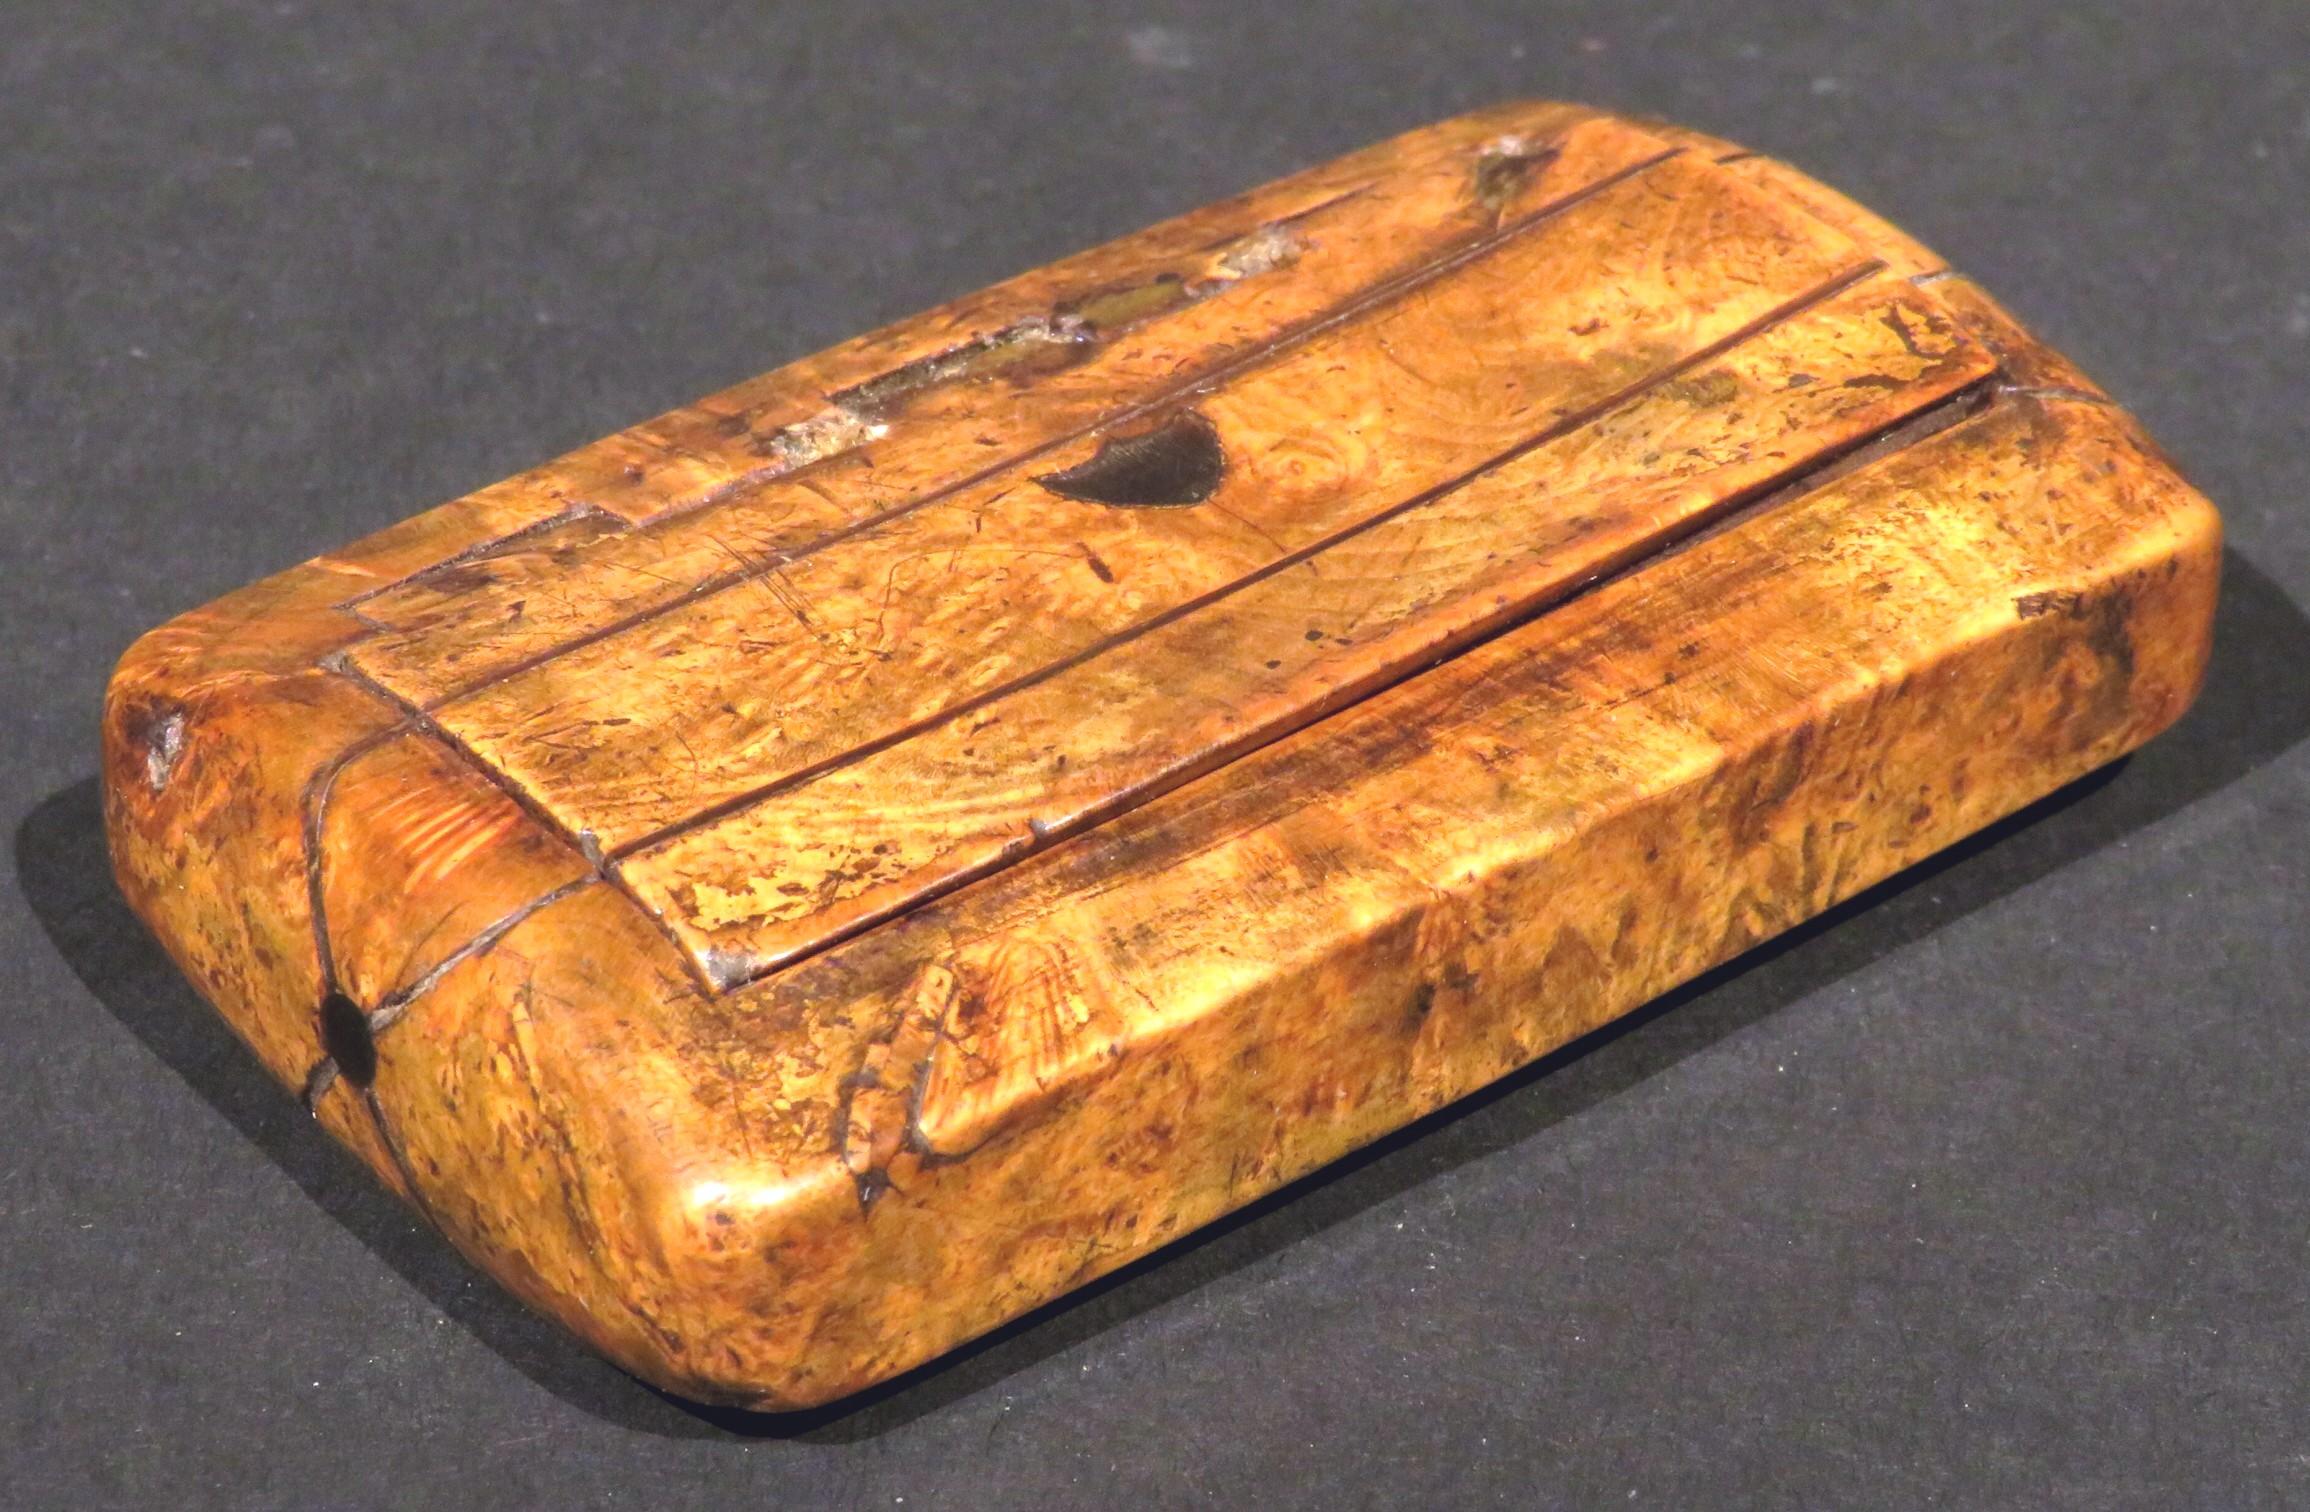 A very handsome early 19th century Georgian pocket snuff box, the richly figured burr birch case inlaid with ebony stringing and an ebony shield-shaped cartouche, the functioning lid opening on wooden hinges to a grained interior. The exterior